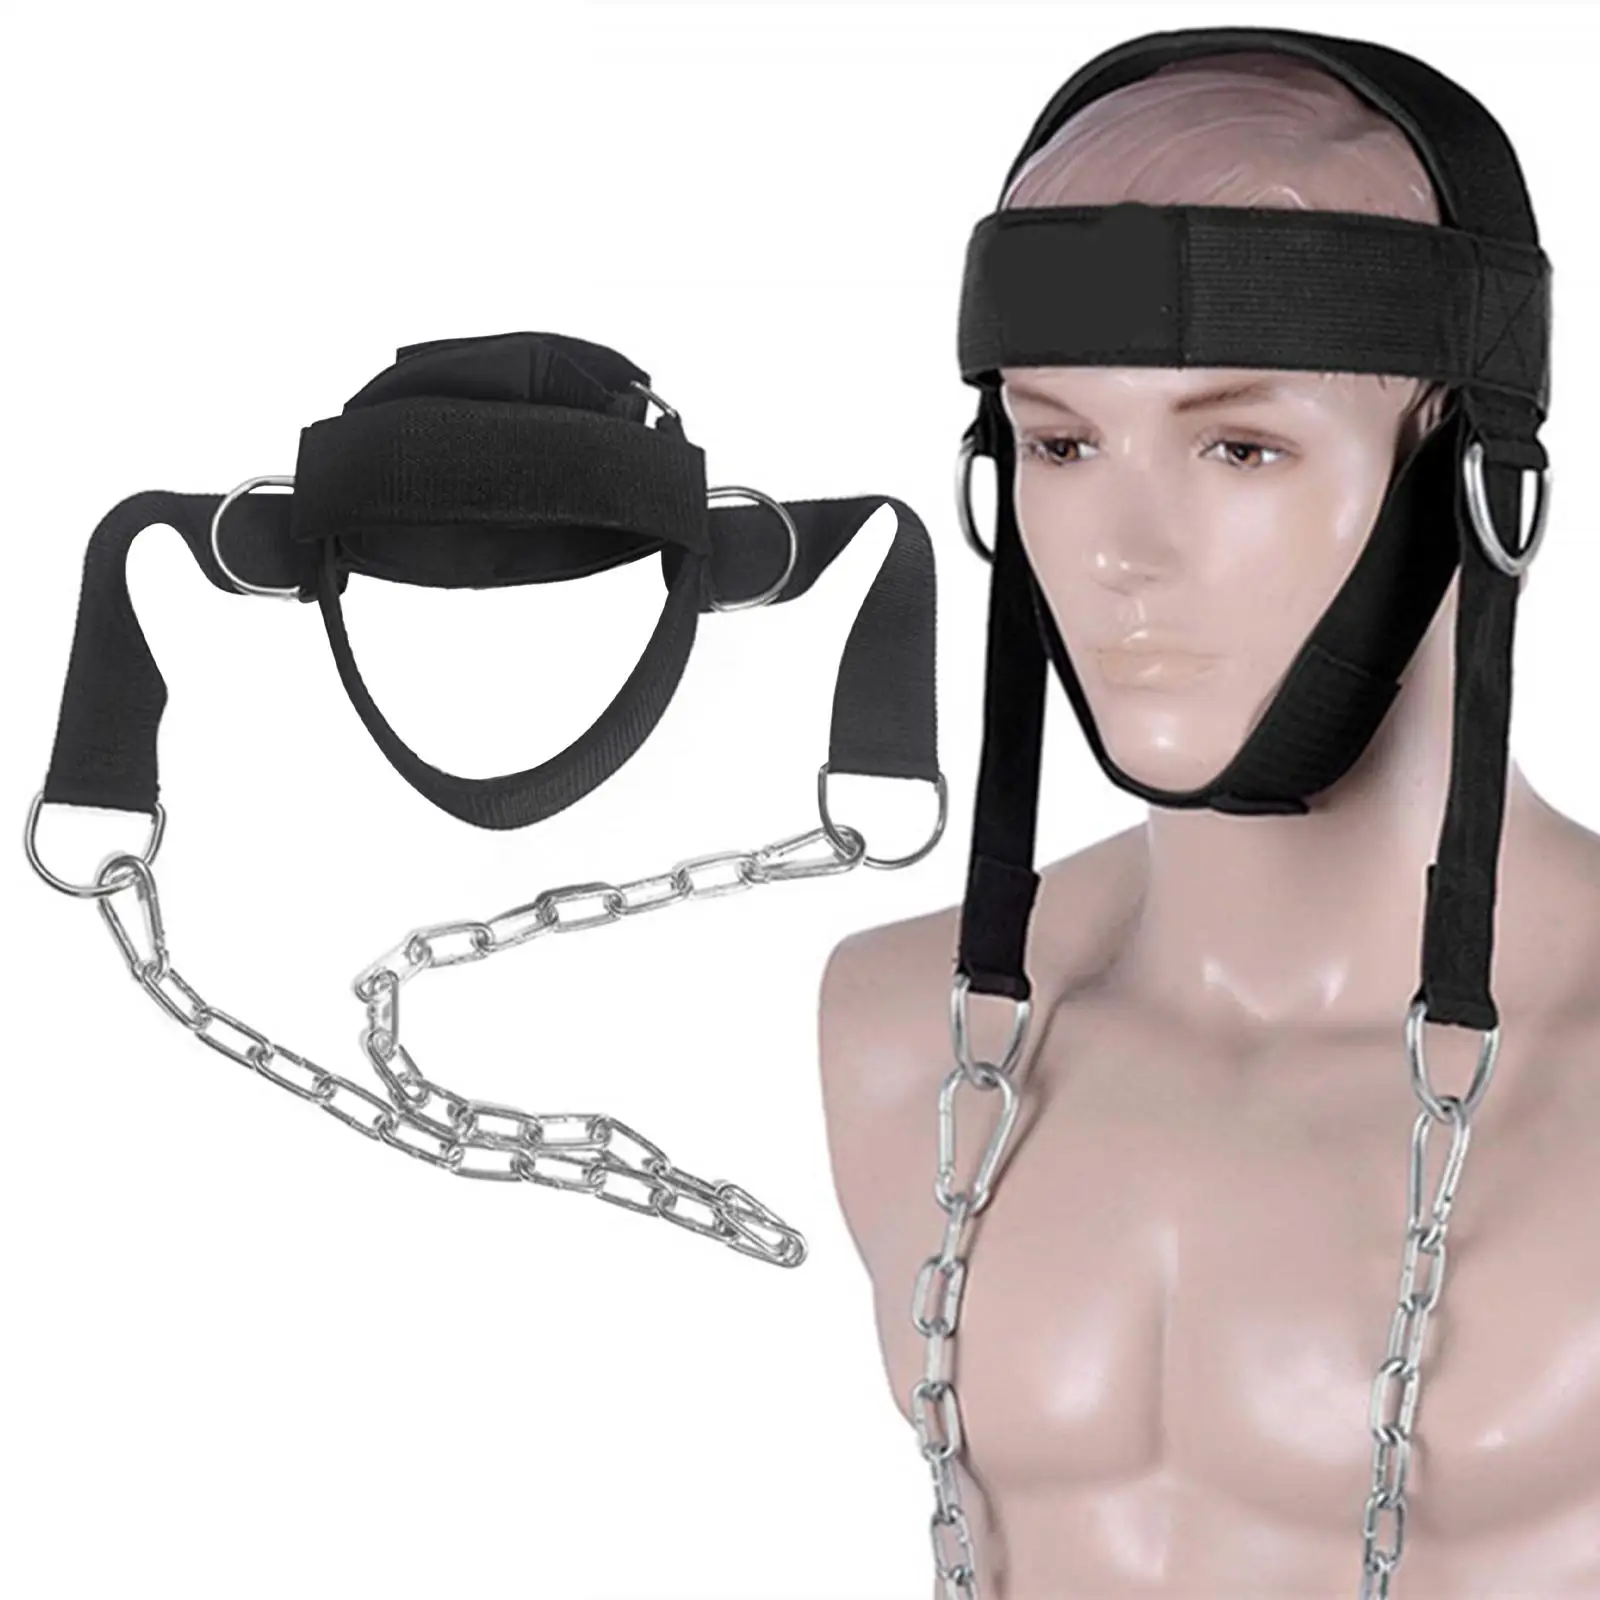 1 Piece Head Neck Harness Strengh Exercise Strap for Weight Lifting Fitness Training